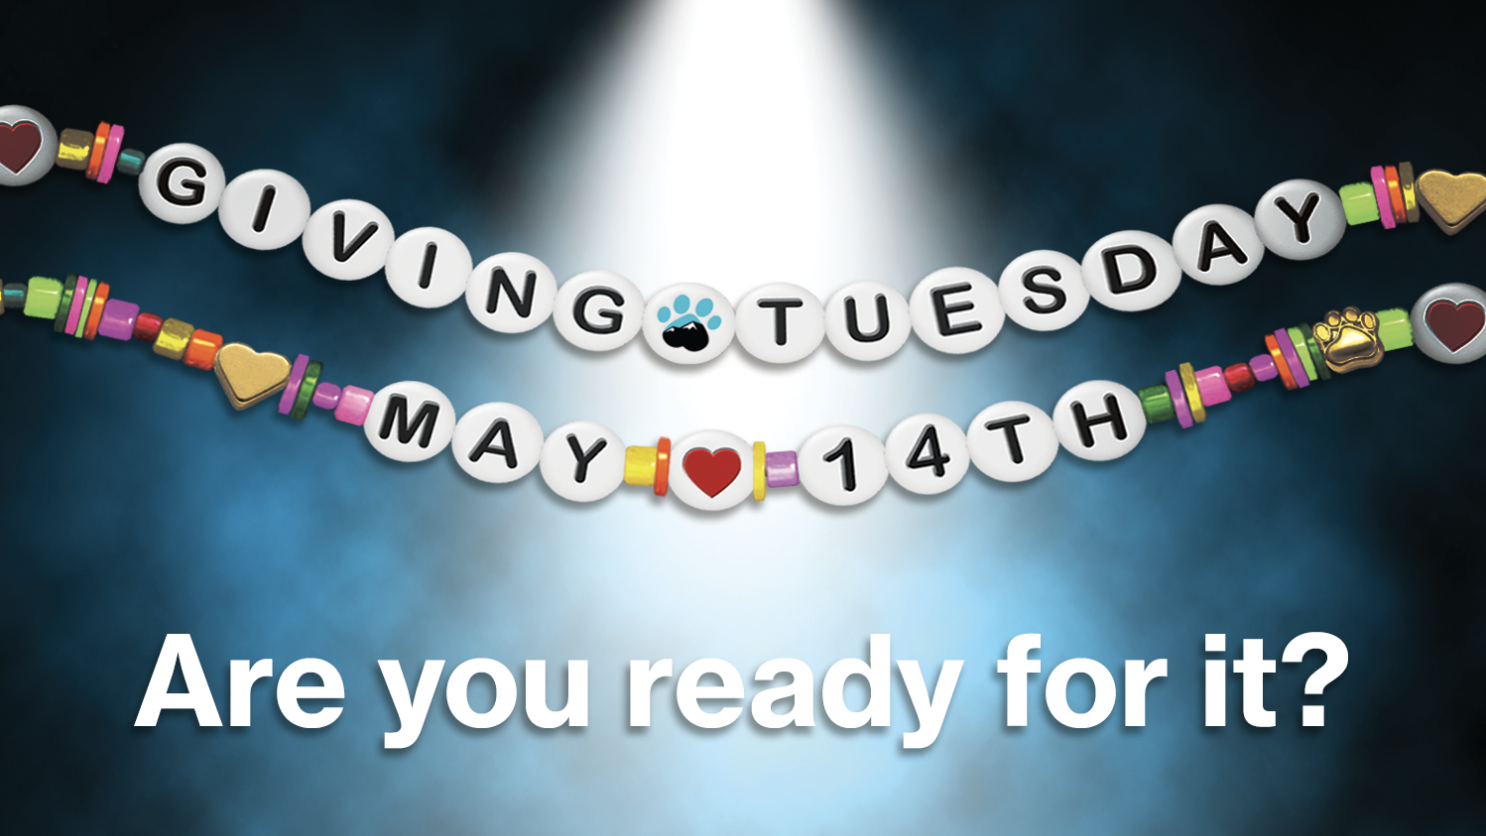 A vibrant graphic announcing "Spring Giving Tuesday" set for May 14th. Bright, joyful emojis dance around the letters in an endearing show of celebration. A spotlight pierces the dark, smoky backdrop.